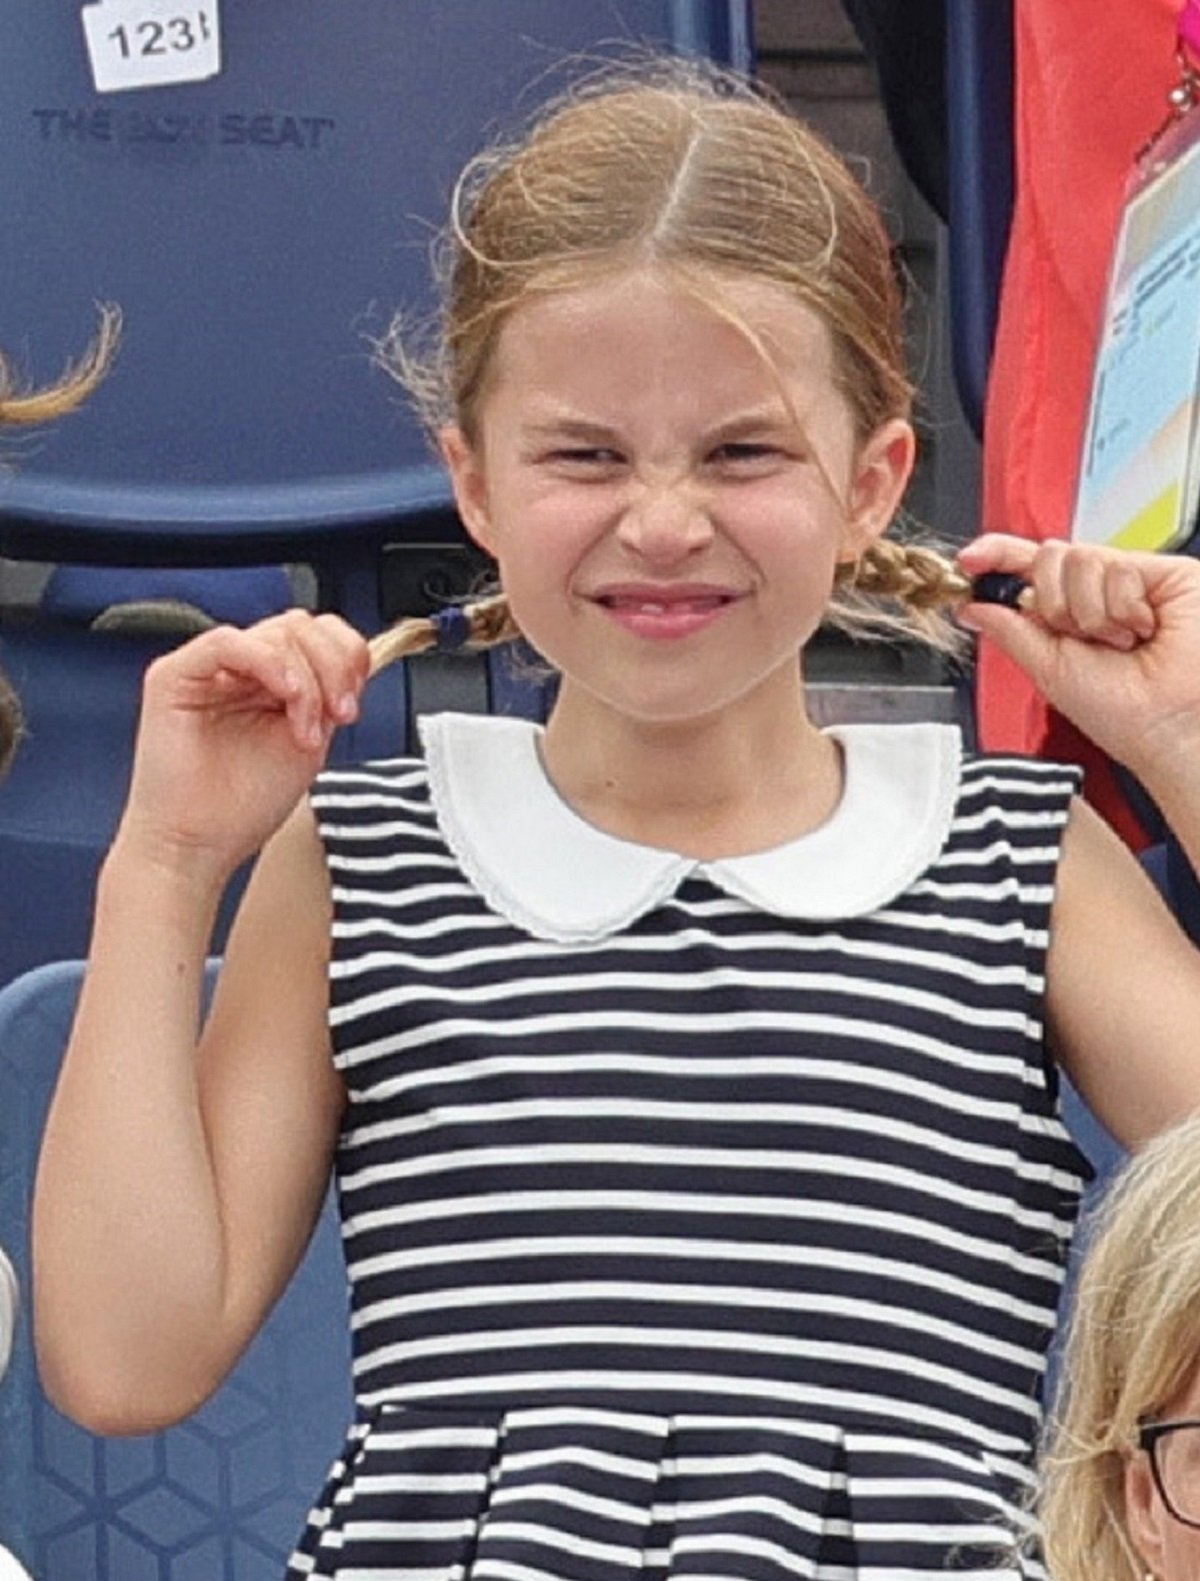 Princess Charlotte pulls on her pigtails while watching a match during Day 5 of the Commonwealth Games